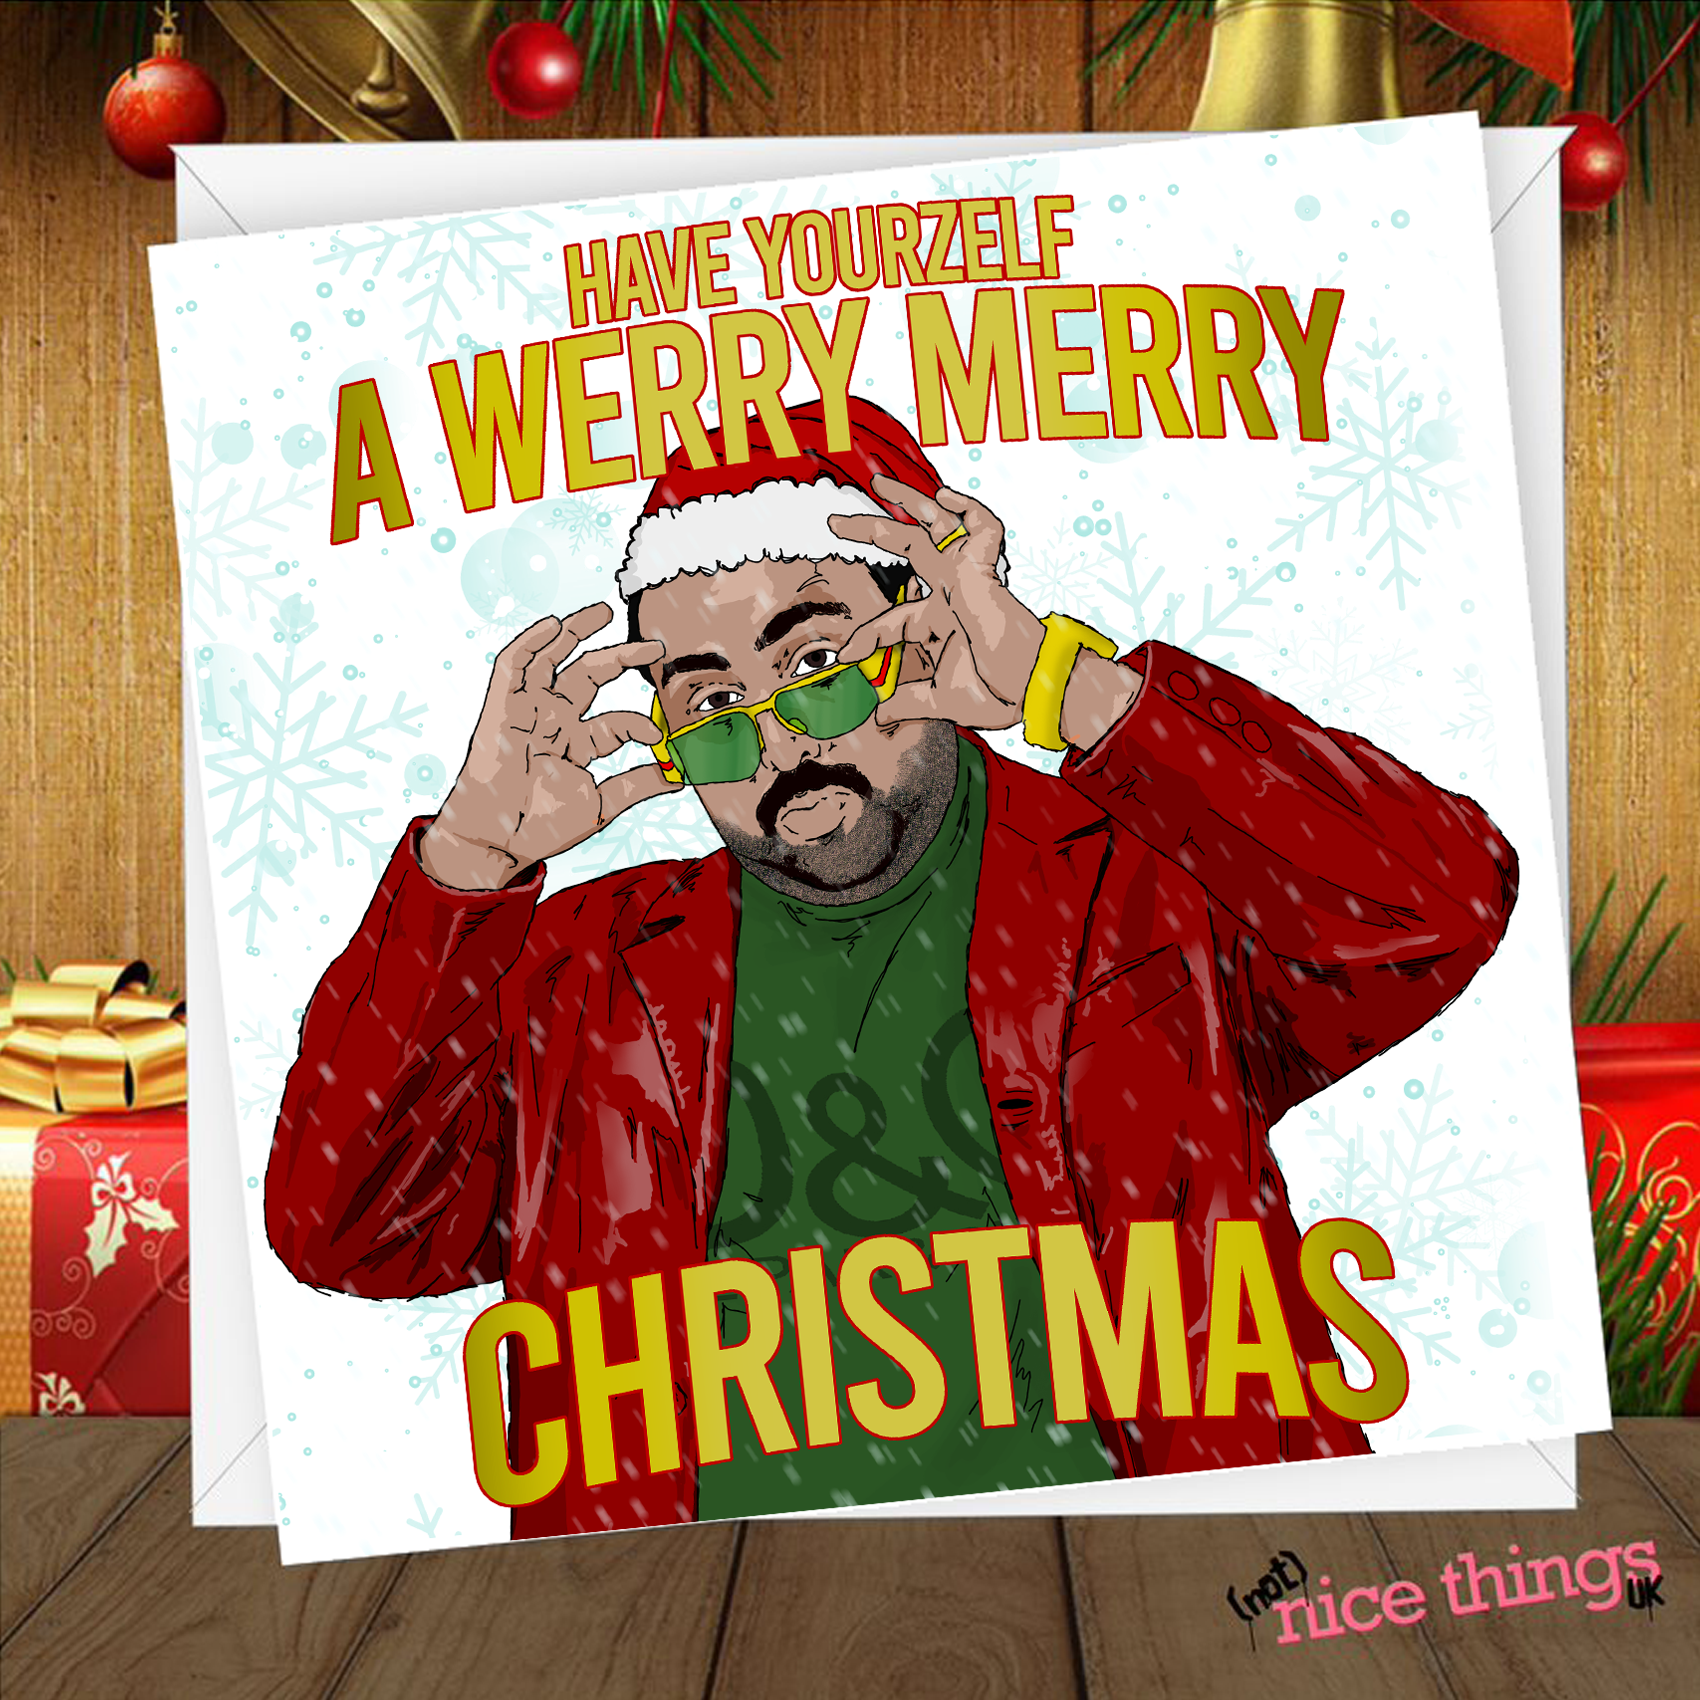 People Just Do Nothing Funny Christmas Card, Chabuddy G Kurupt FM Christmas Greetings Card for him, MC Grindah for her, Boyfriend, Girlfriend, Friend 